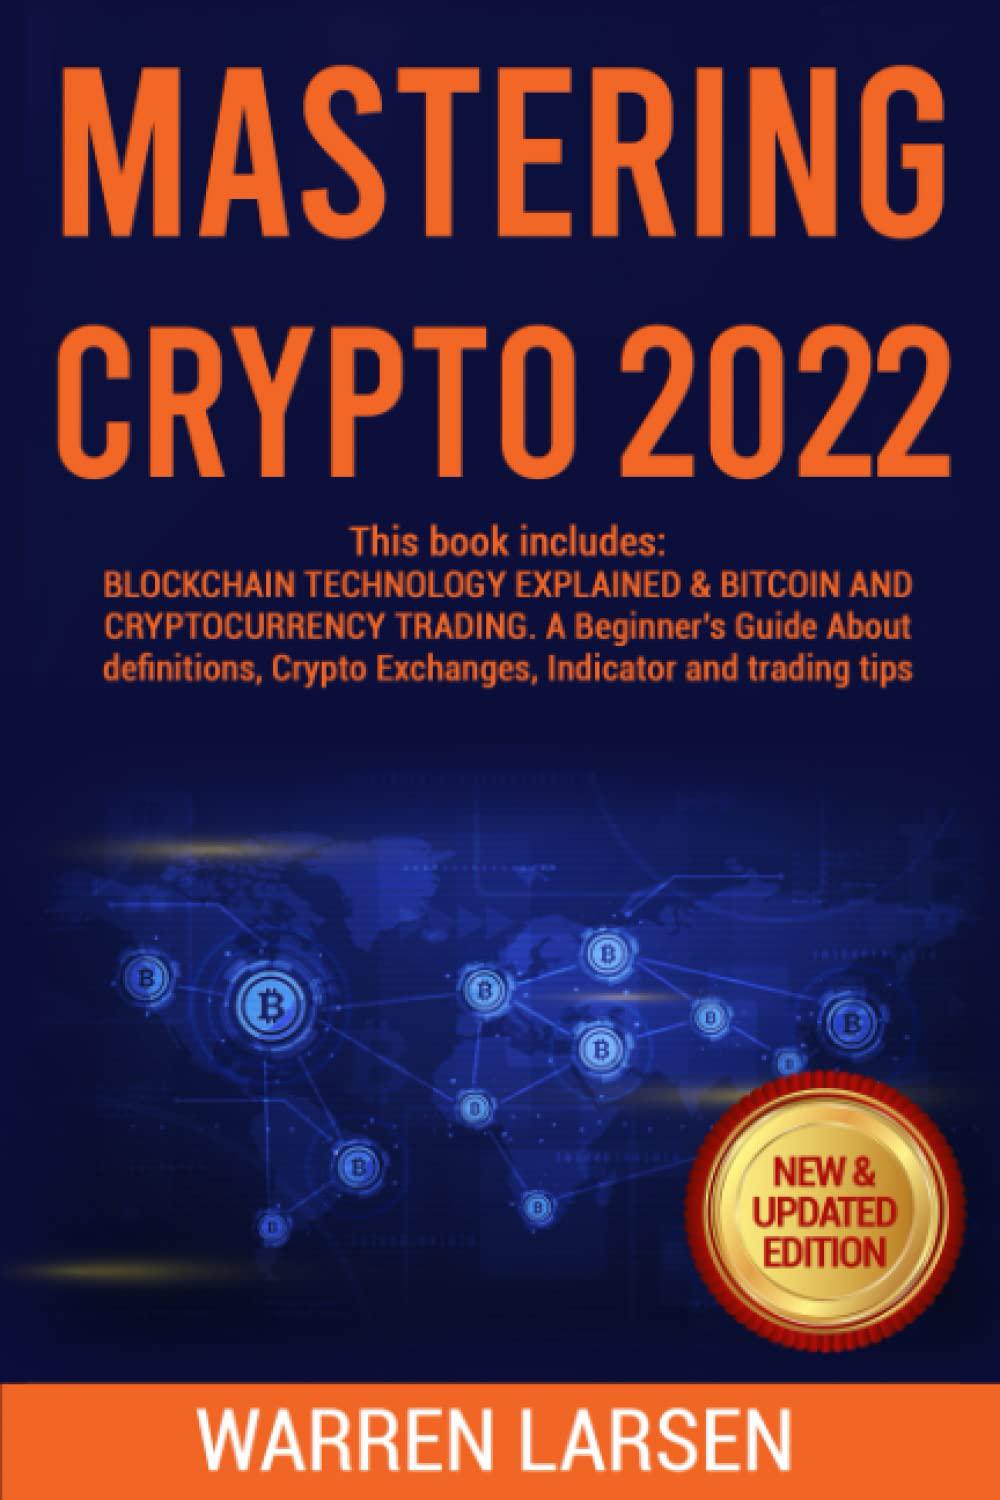 Best books about blockchain you can read in 2022 Best books about blockchain you can read in 2022 